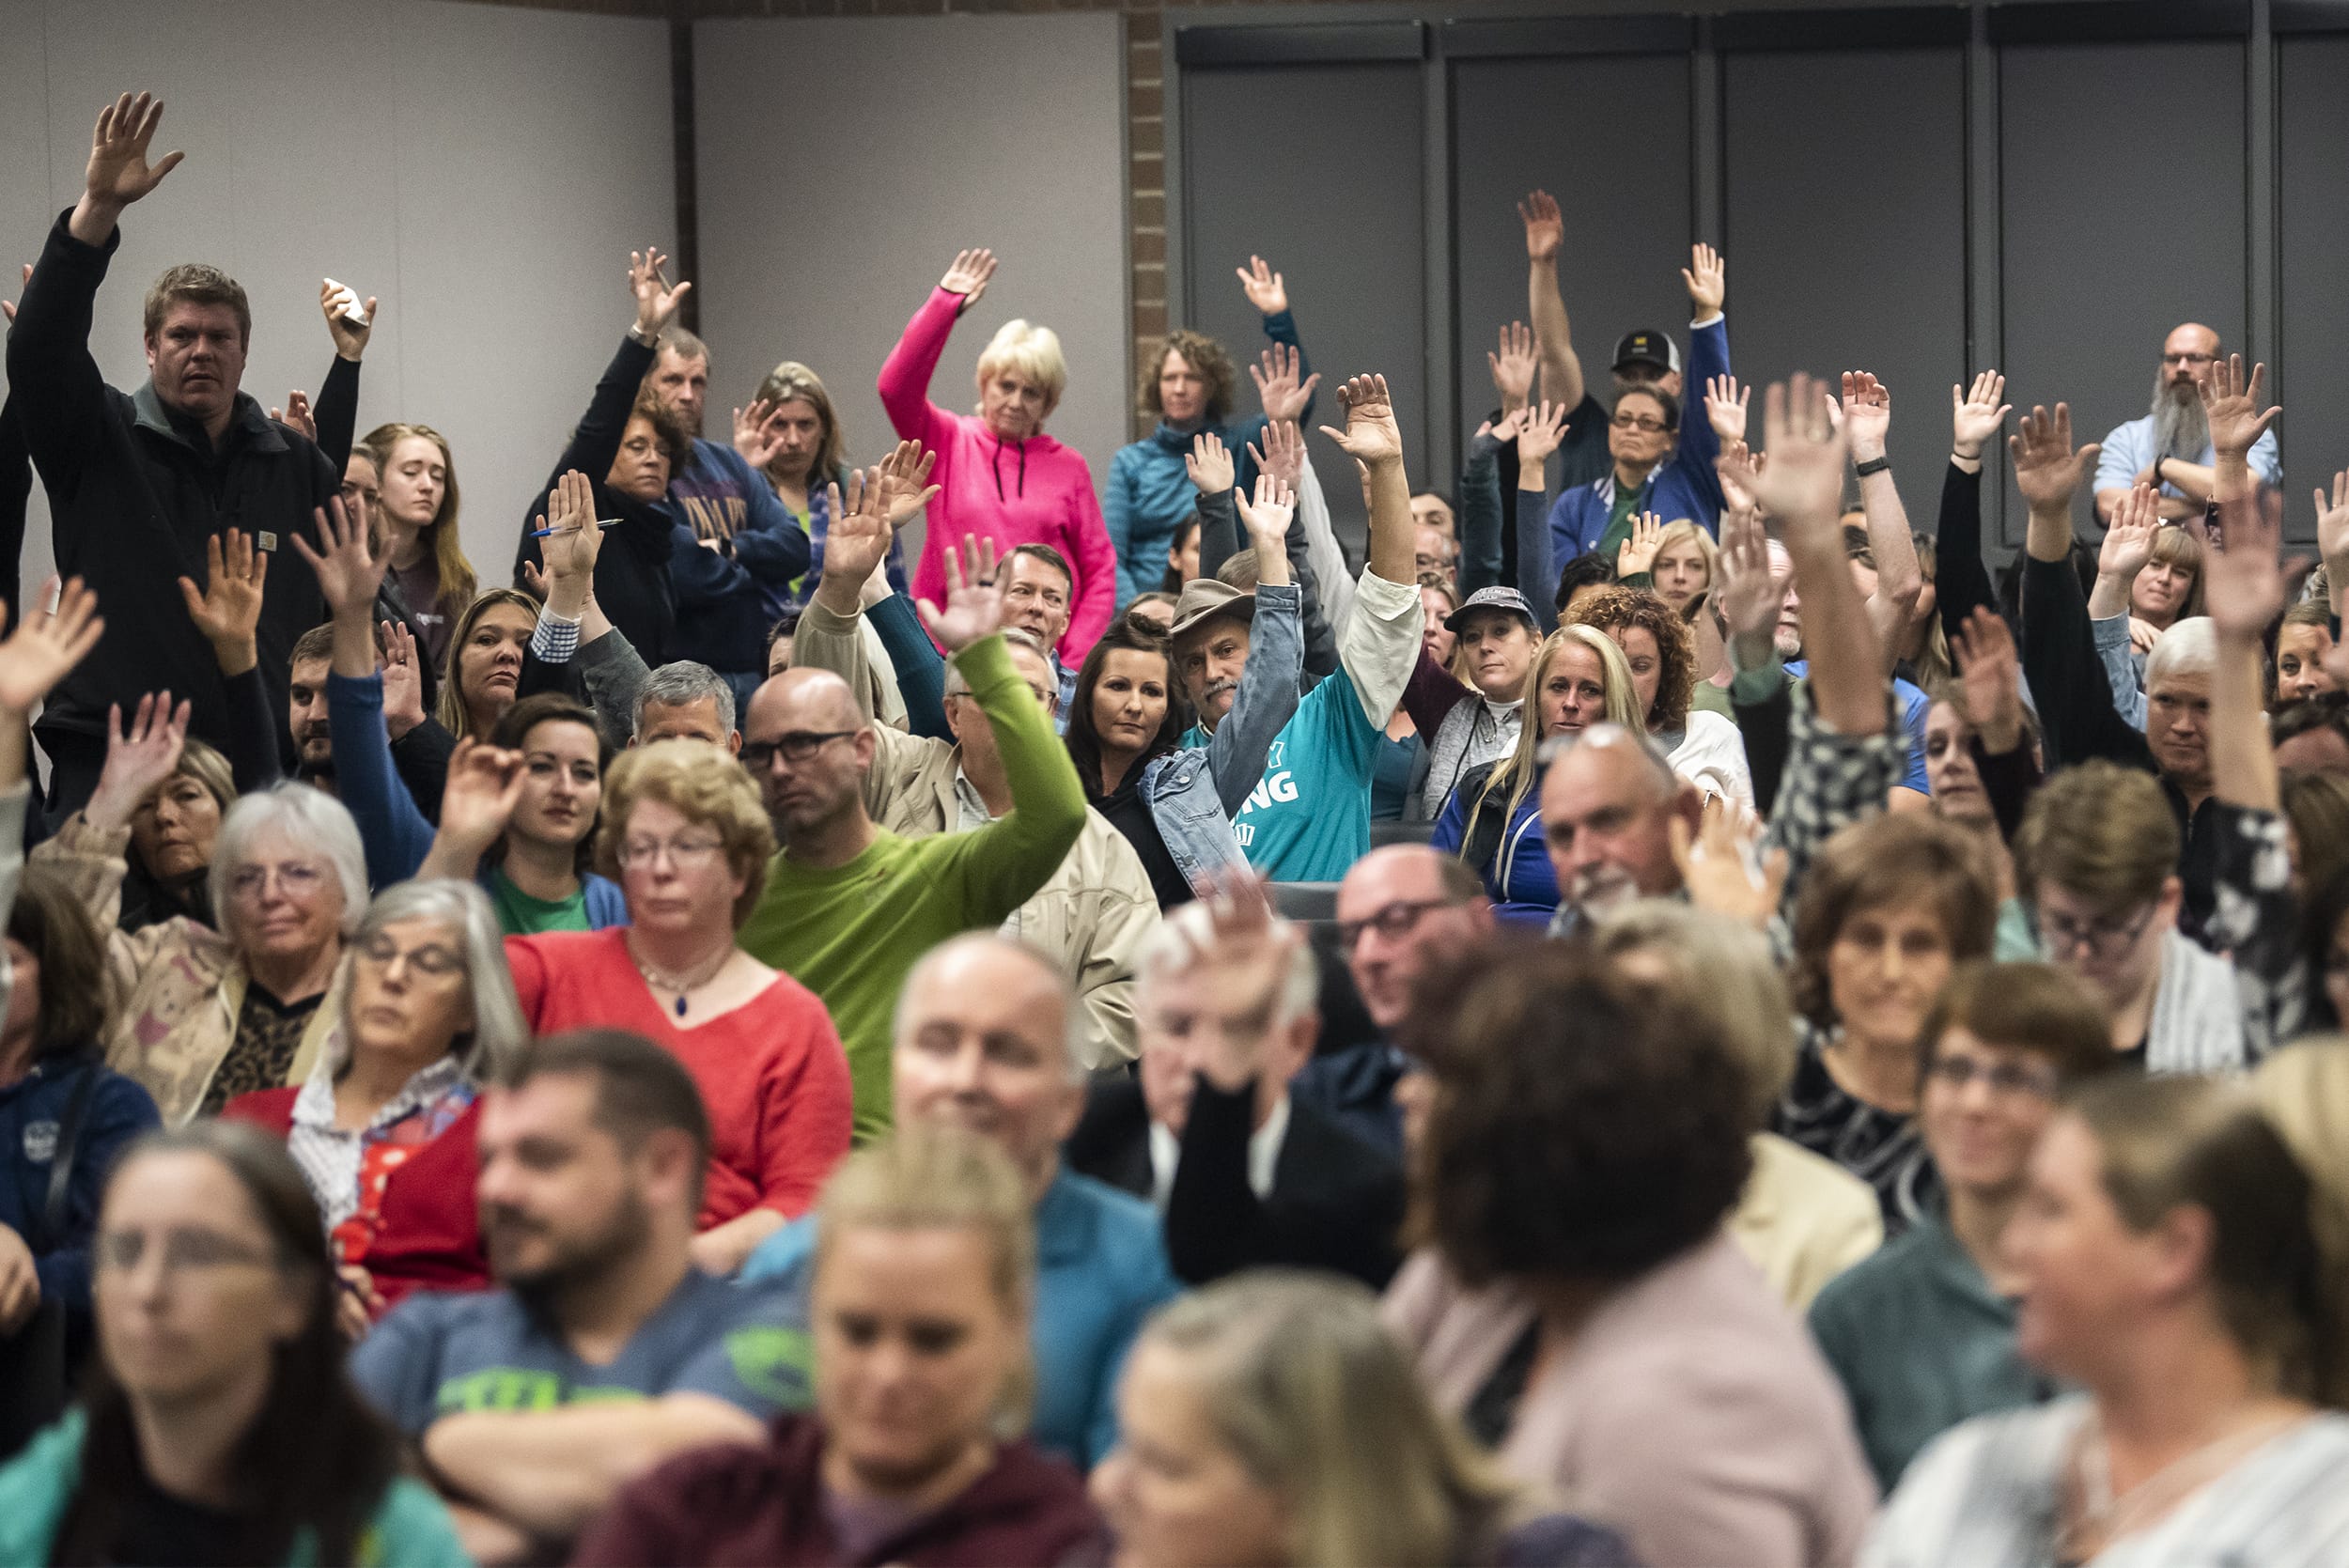 Attendees raise their hands to show their opposition to new sex education curriculum during a Battle Ground Public Schools Board of Directors meeting on Monday night, Oct. 14, 2019.